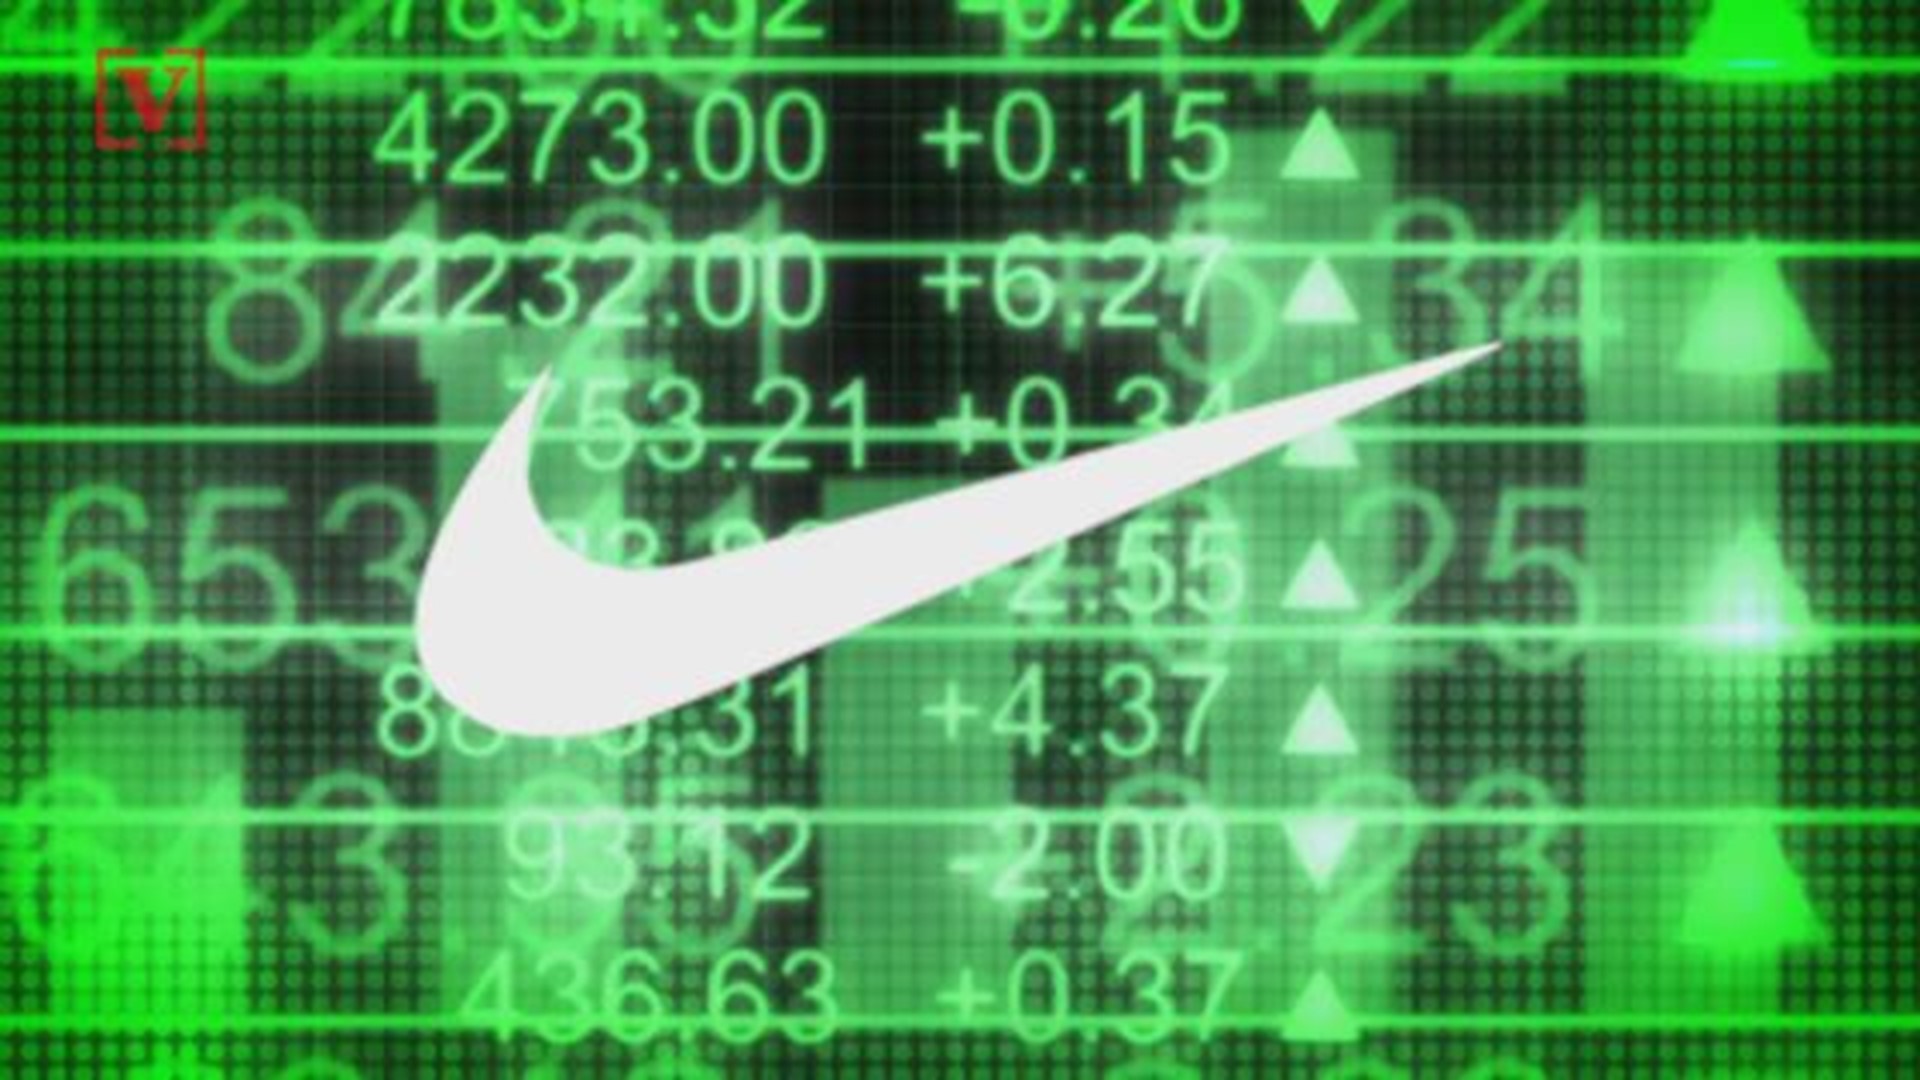 radical lista zapatilla Nike Stock Price Reaches All-time High After Kaepernick Deal | wkyc.com